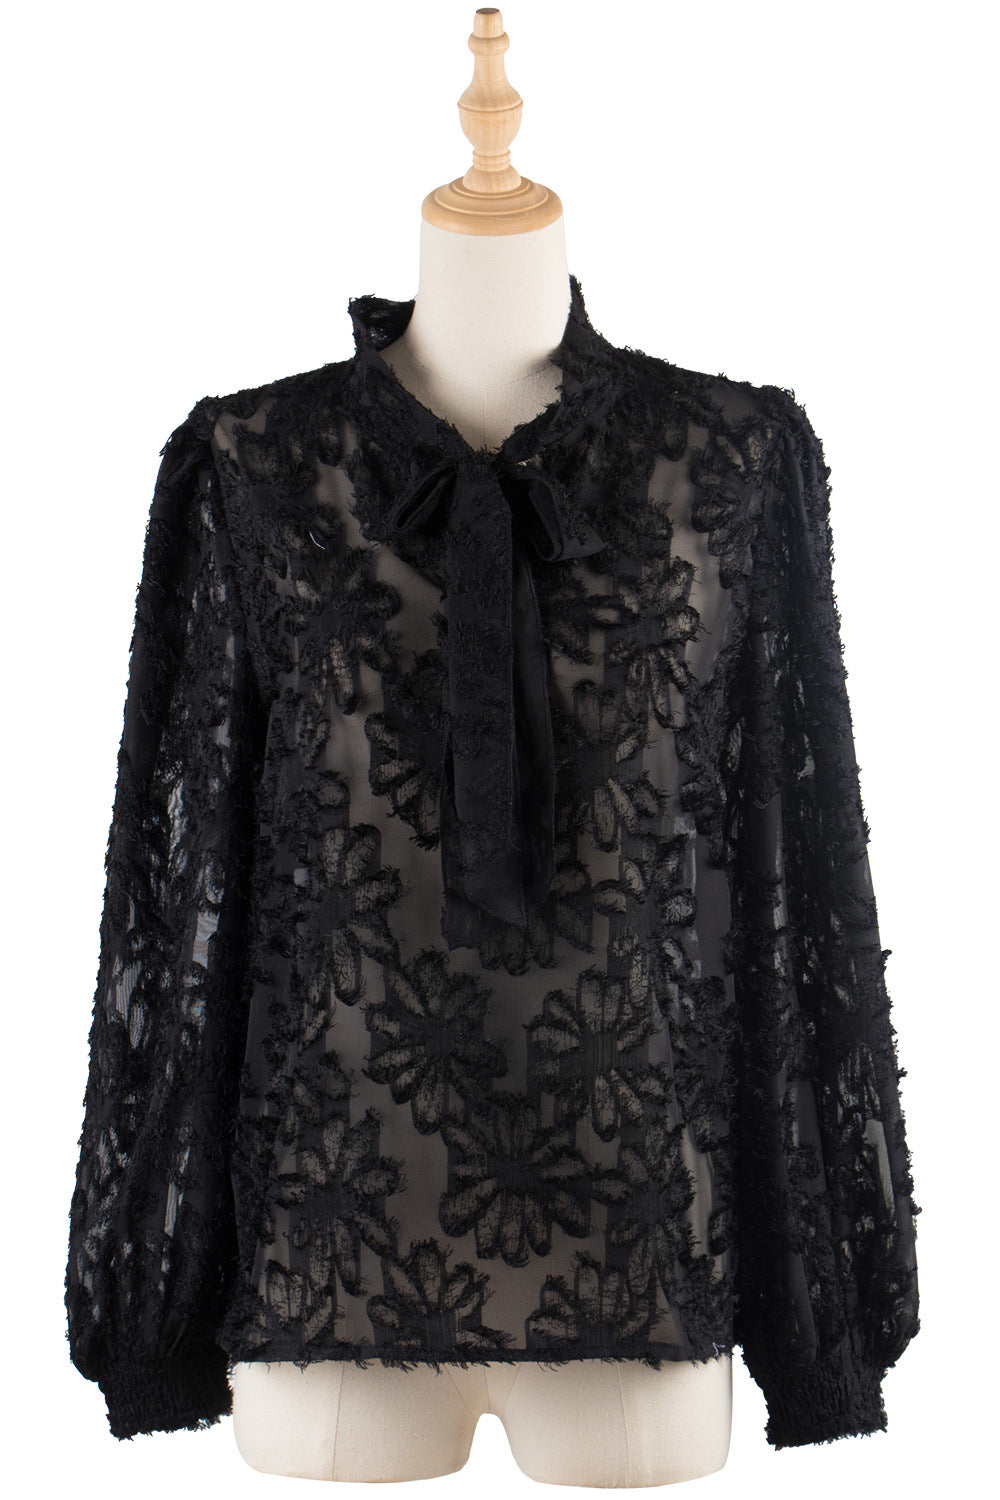 FASHION JACQUARD FLOCKED LONG-SLEEVED BOW-KNOT SHIRT PLUS SIZE FINAL SALE NO RETURNS OR EXCHANGES